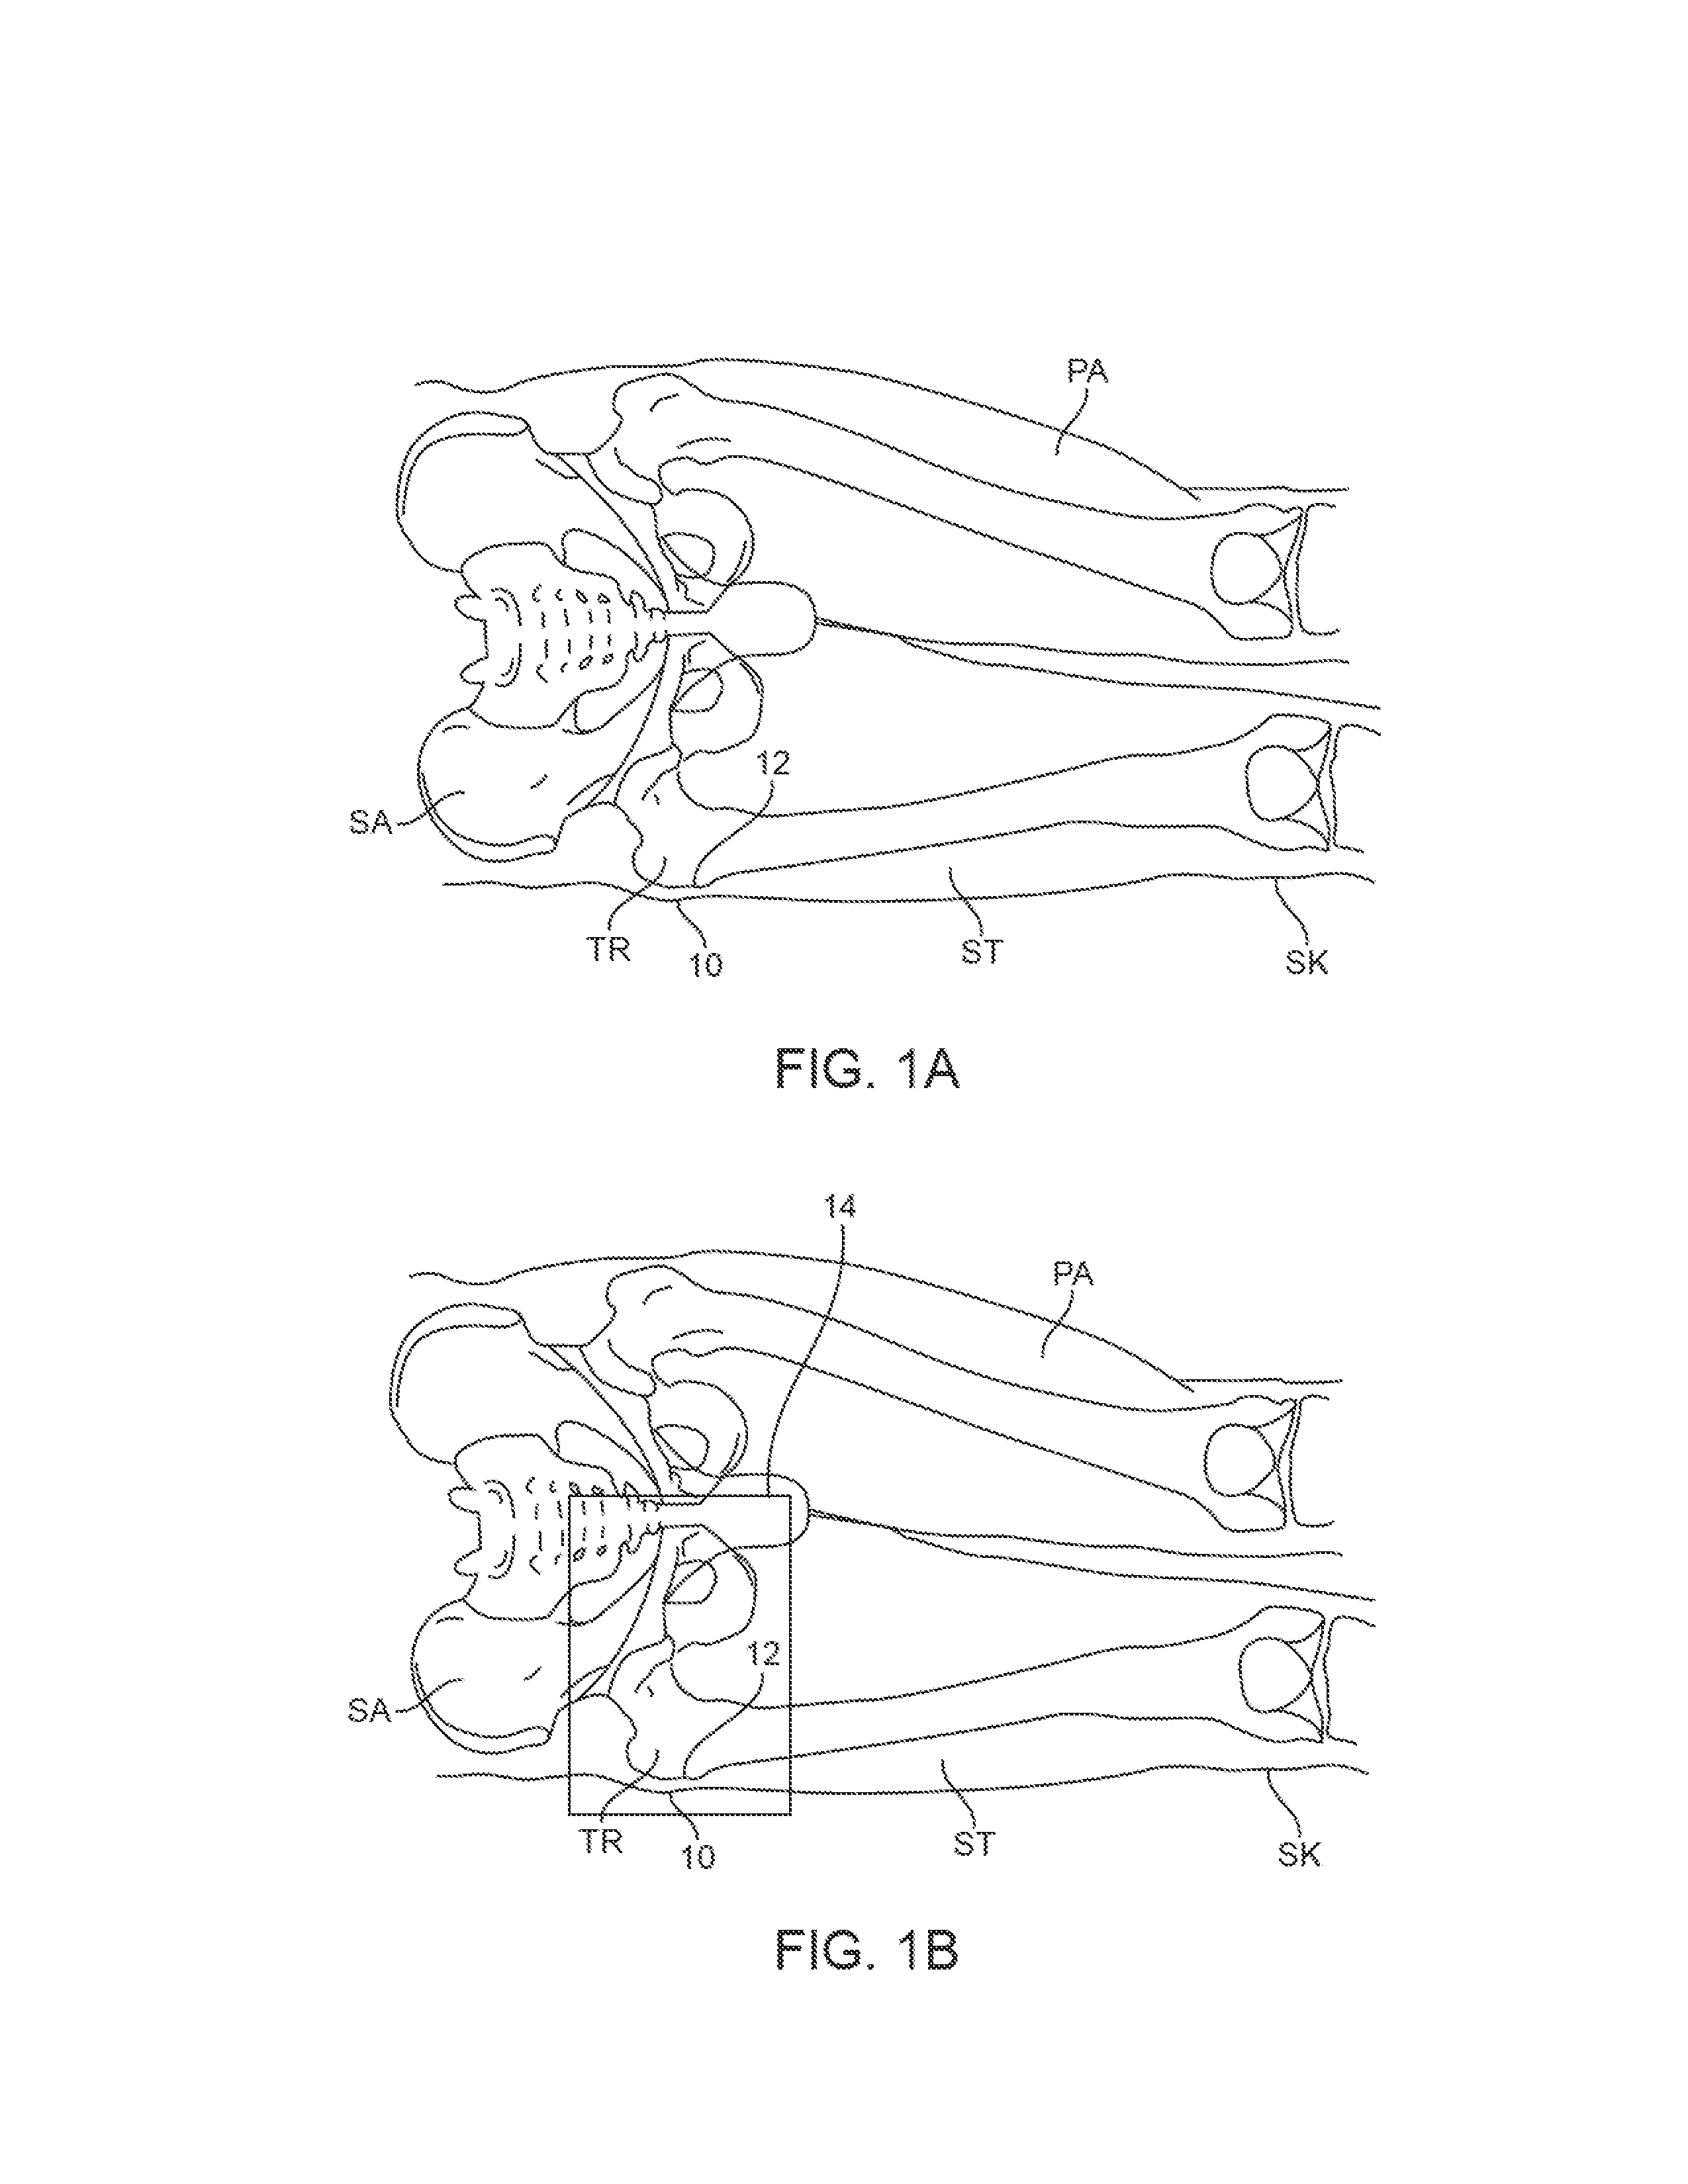 Method and devices for prevention and treatment of pressure ulcers